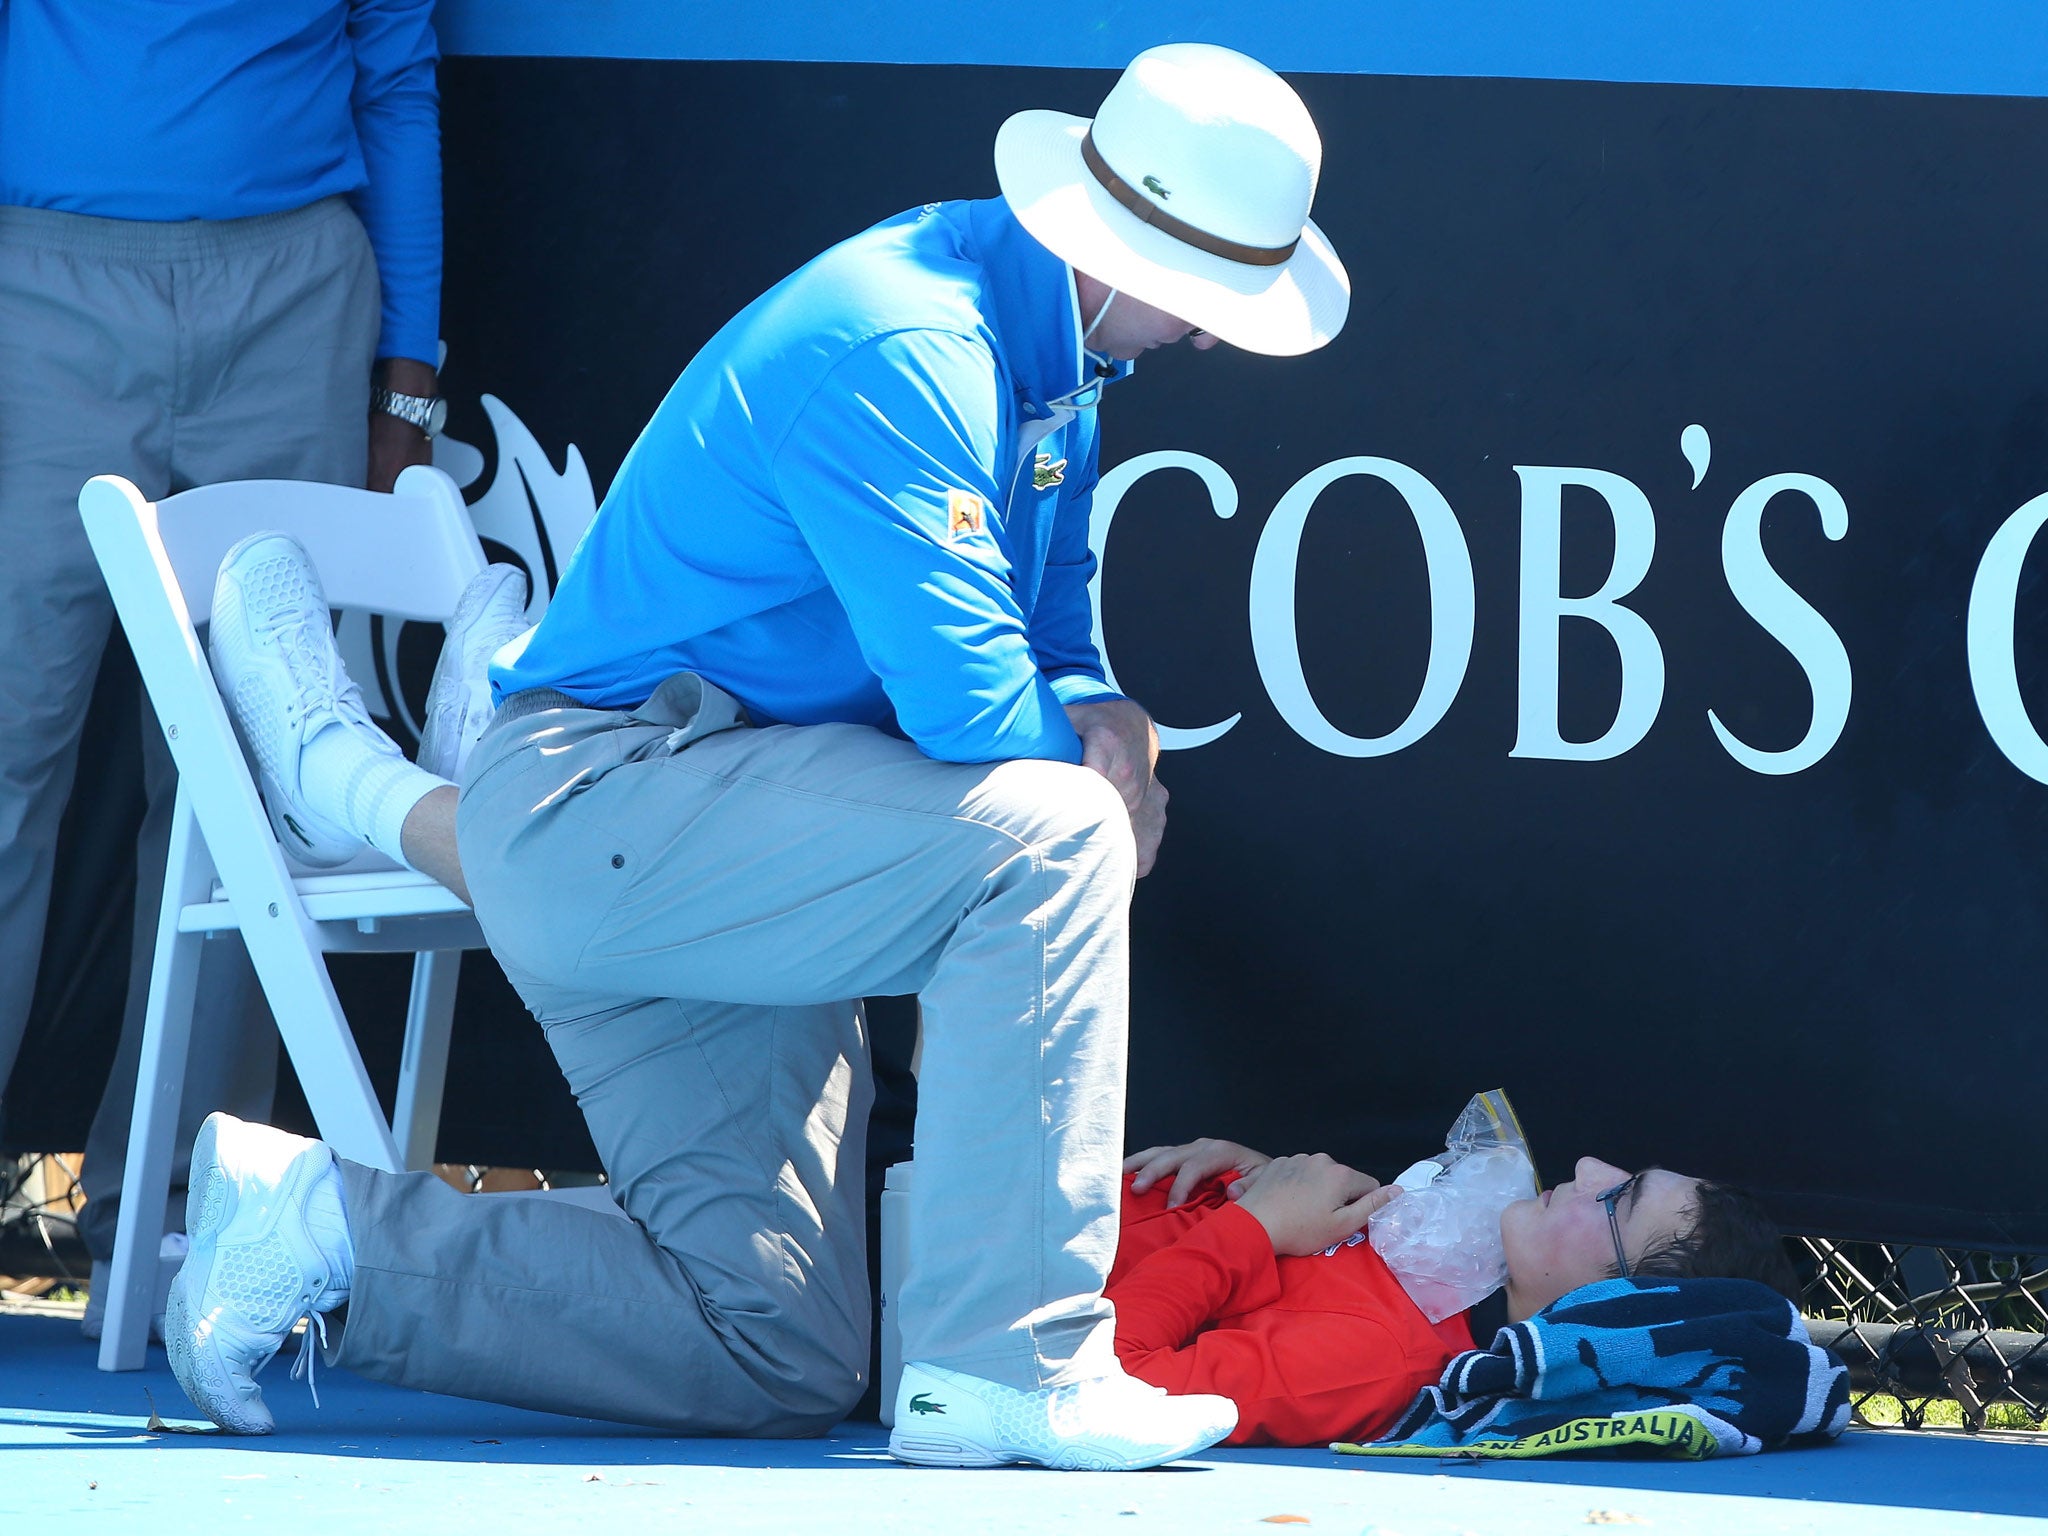 A ballboy faints in the heat, as Melbourne heads towards 43 degrees celsius during day two of the 2014 Australian Open at Melbourne Park